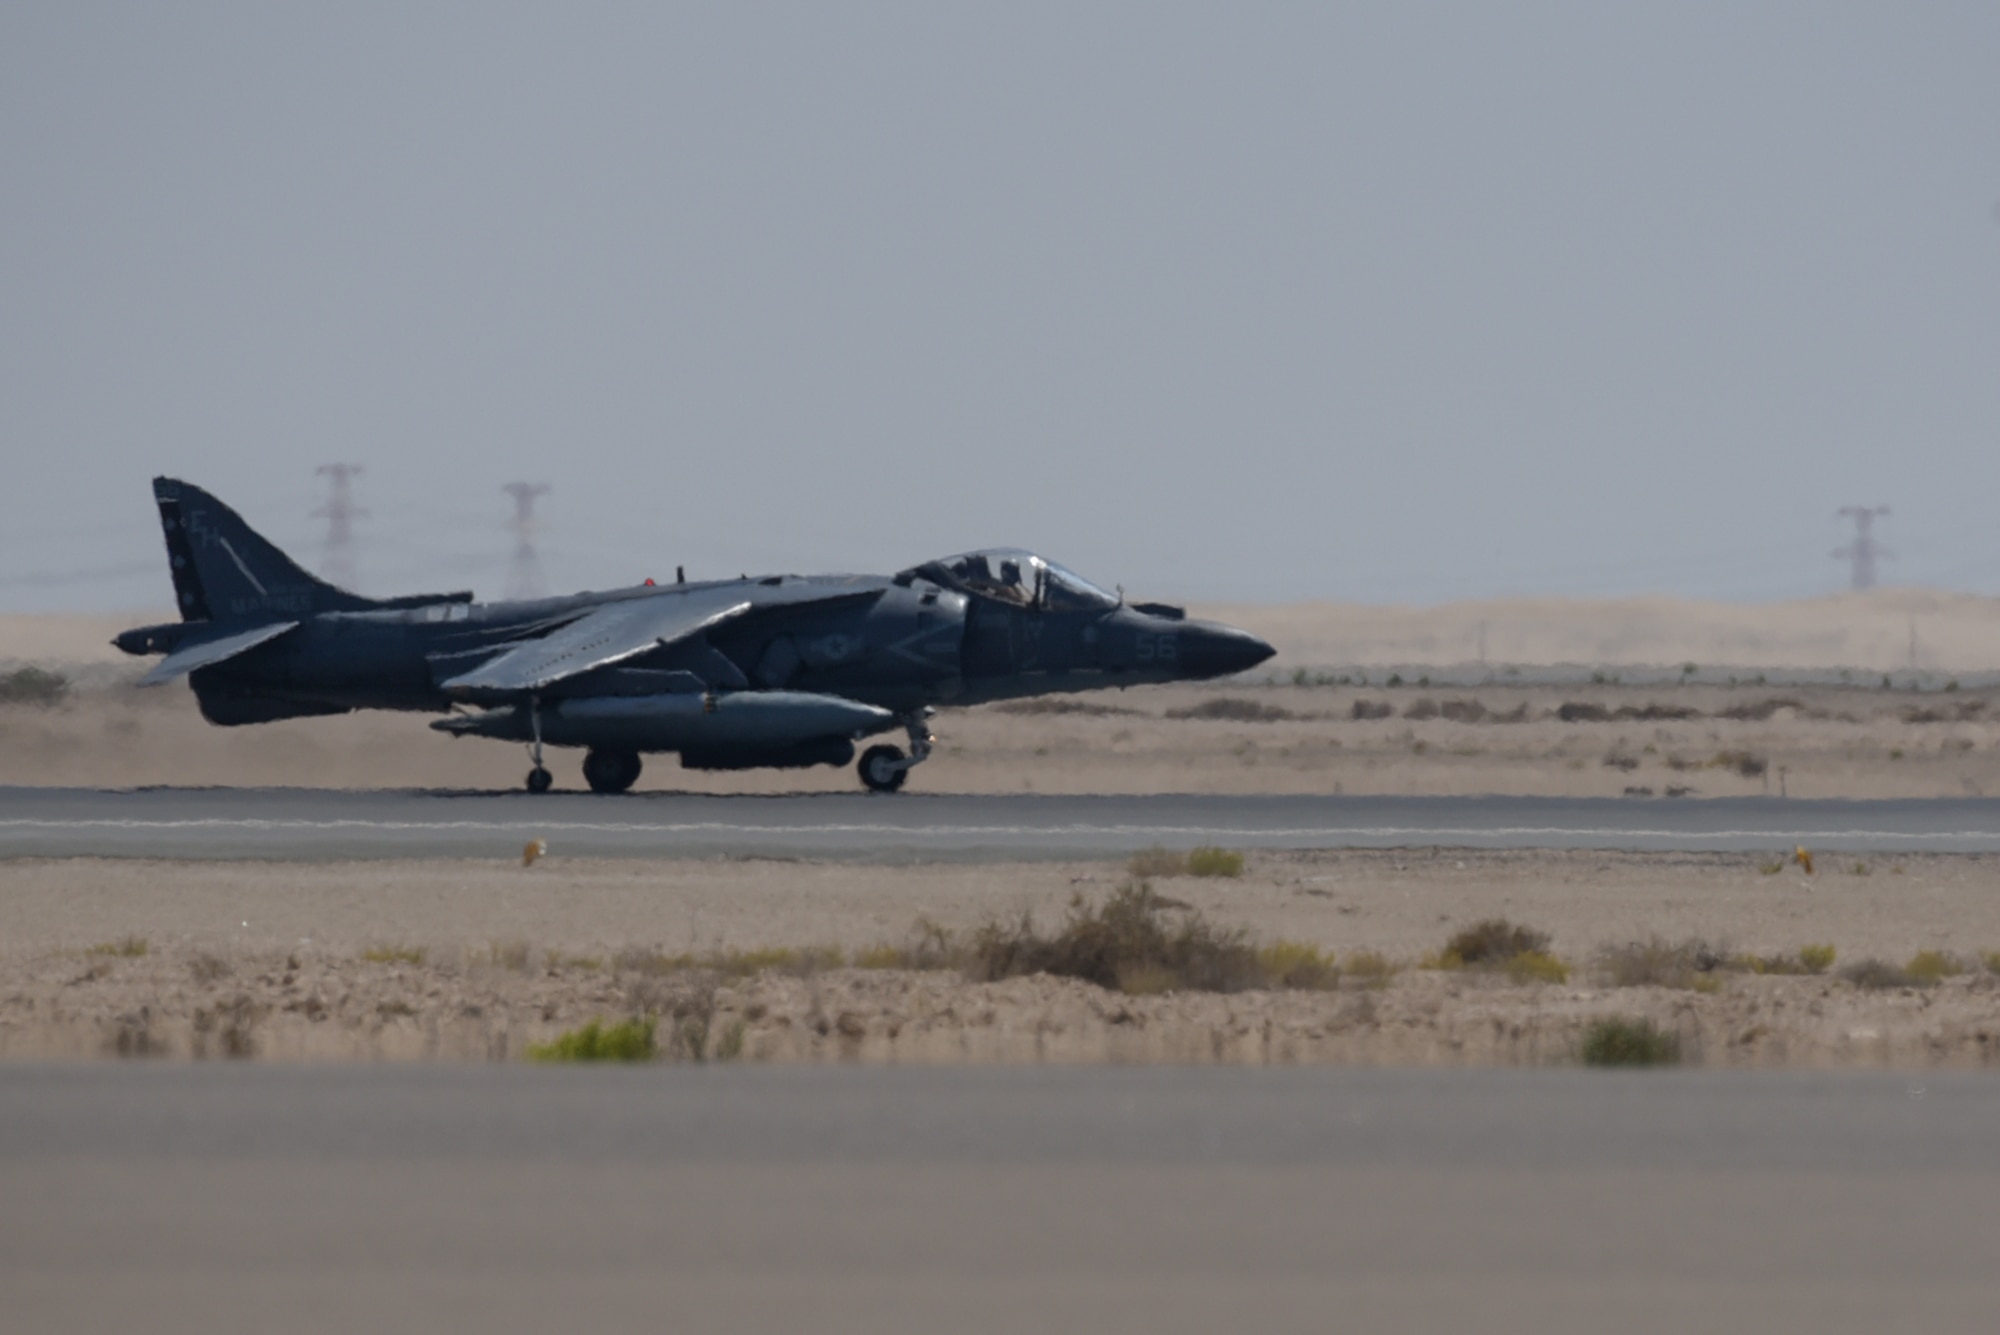 An AV-8B Harrier II, assigned to the 22nd Marine Expeditionary Unit, lands after a mission at Al Dhafra Air Base, United Arab Emirates, April 16, 2019.